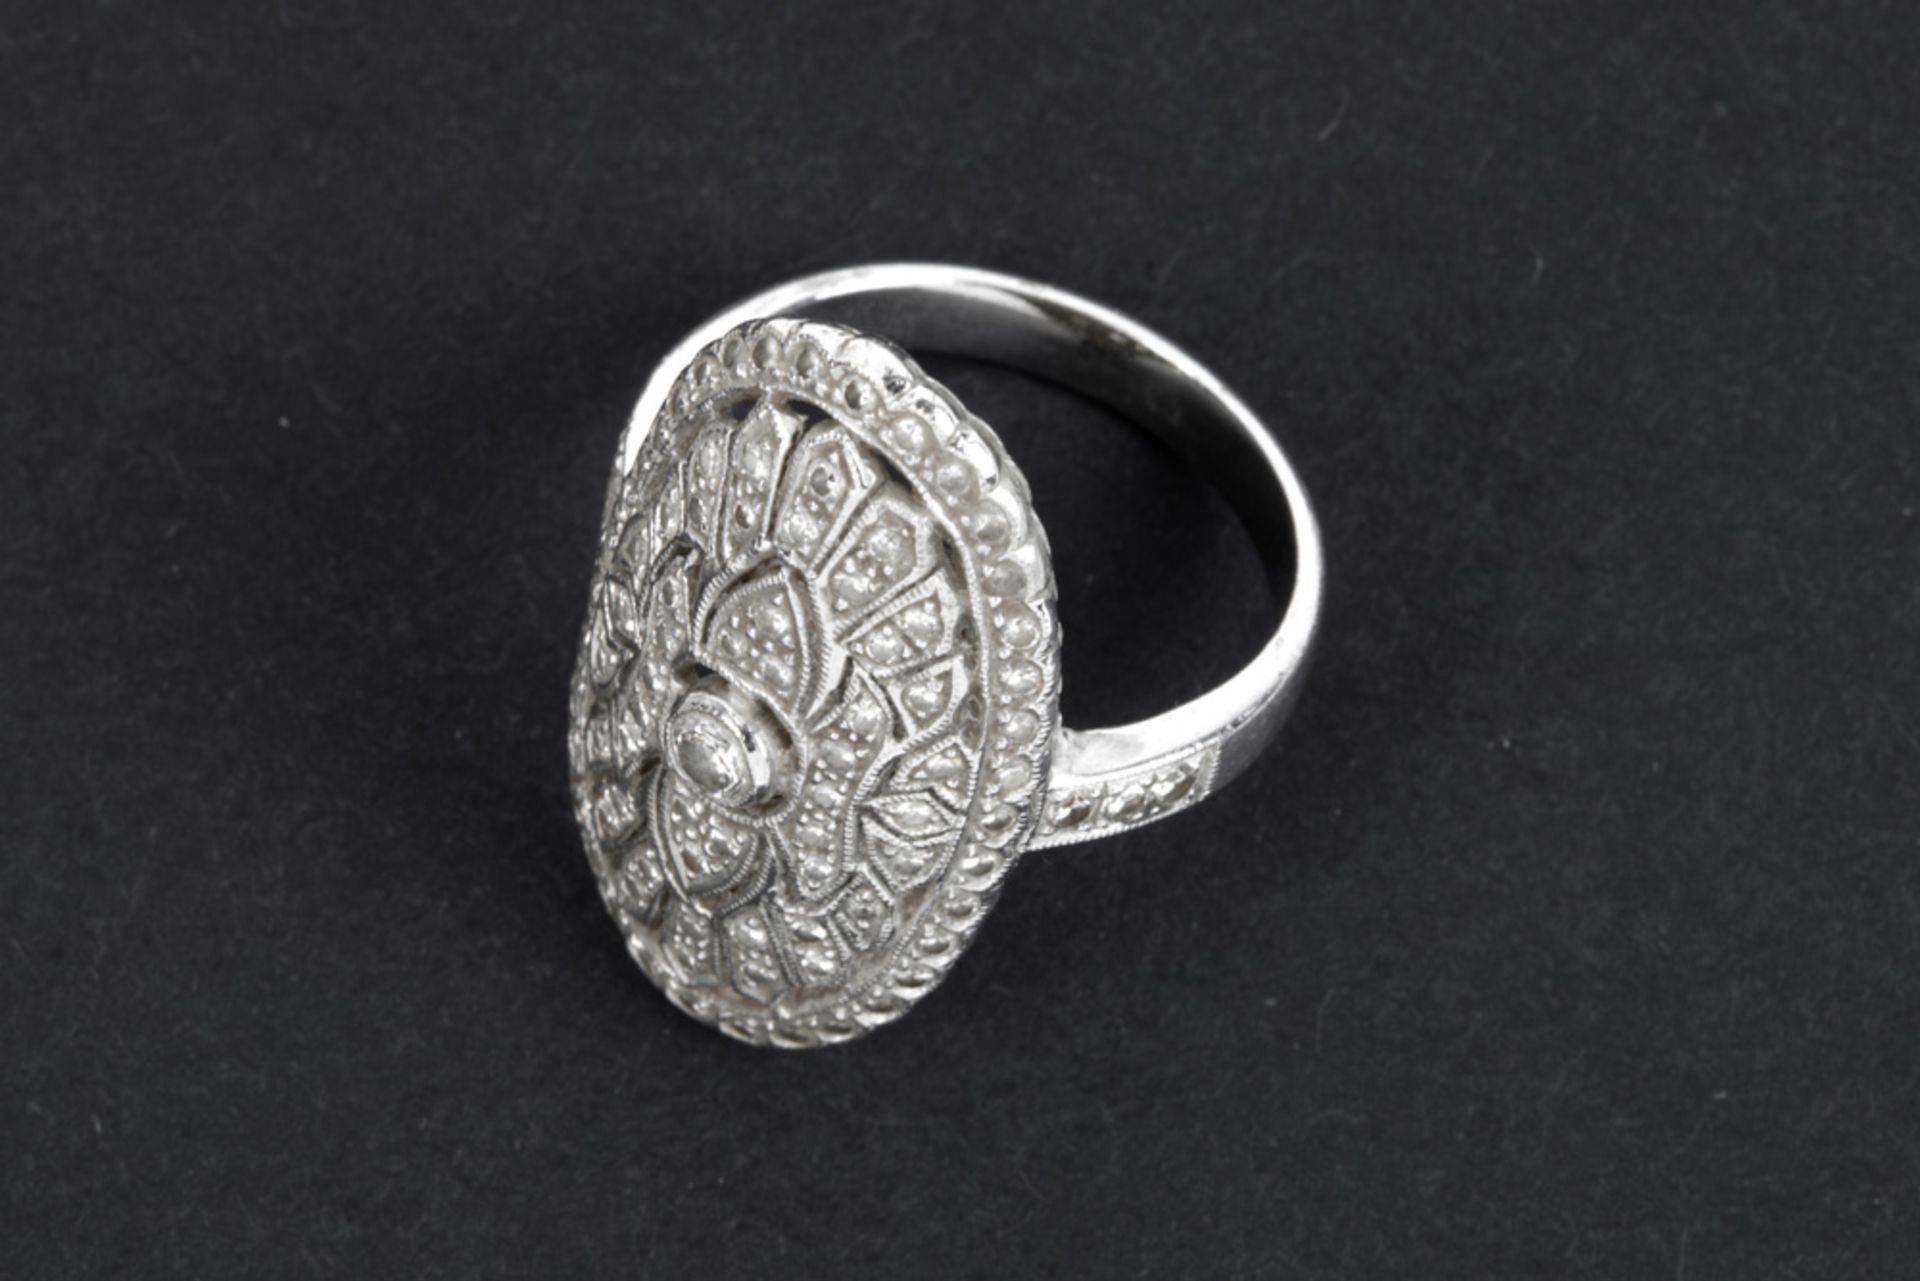 Edwardian style ring in grey gold (18 carat) with ca 0,65 carat of high quality brilliant cut - Image 2 of 2